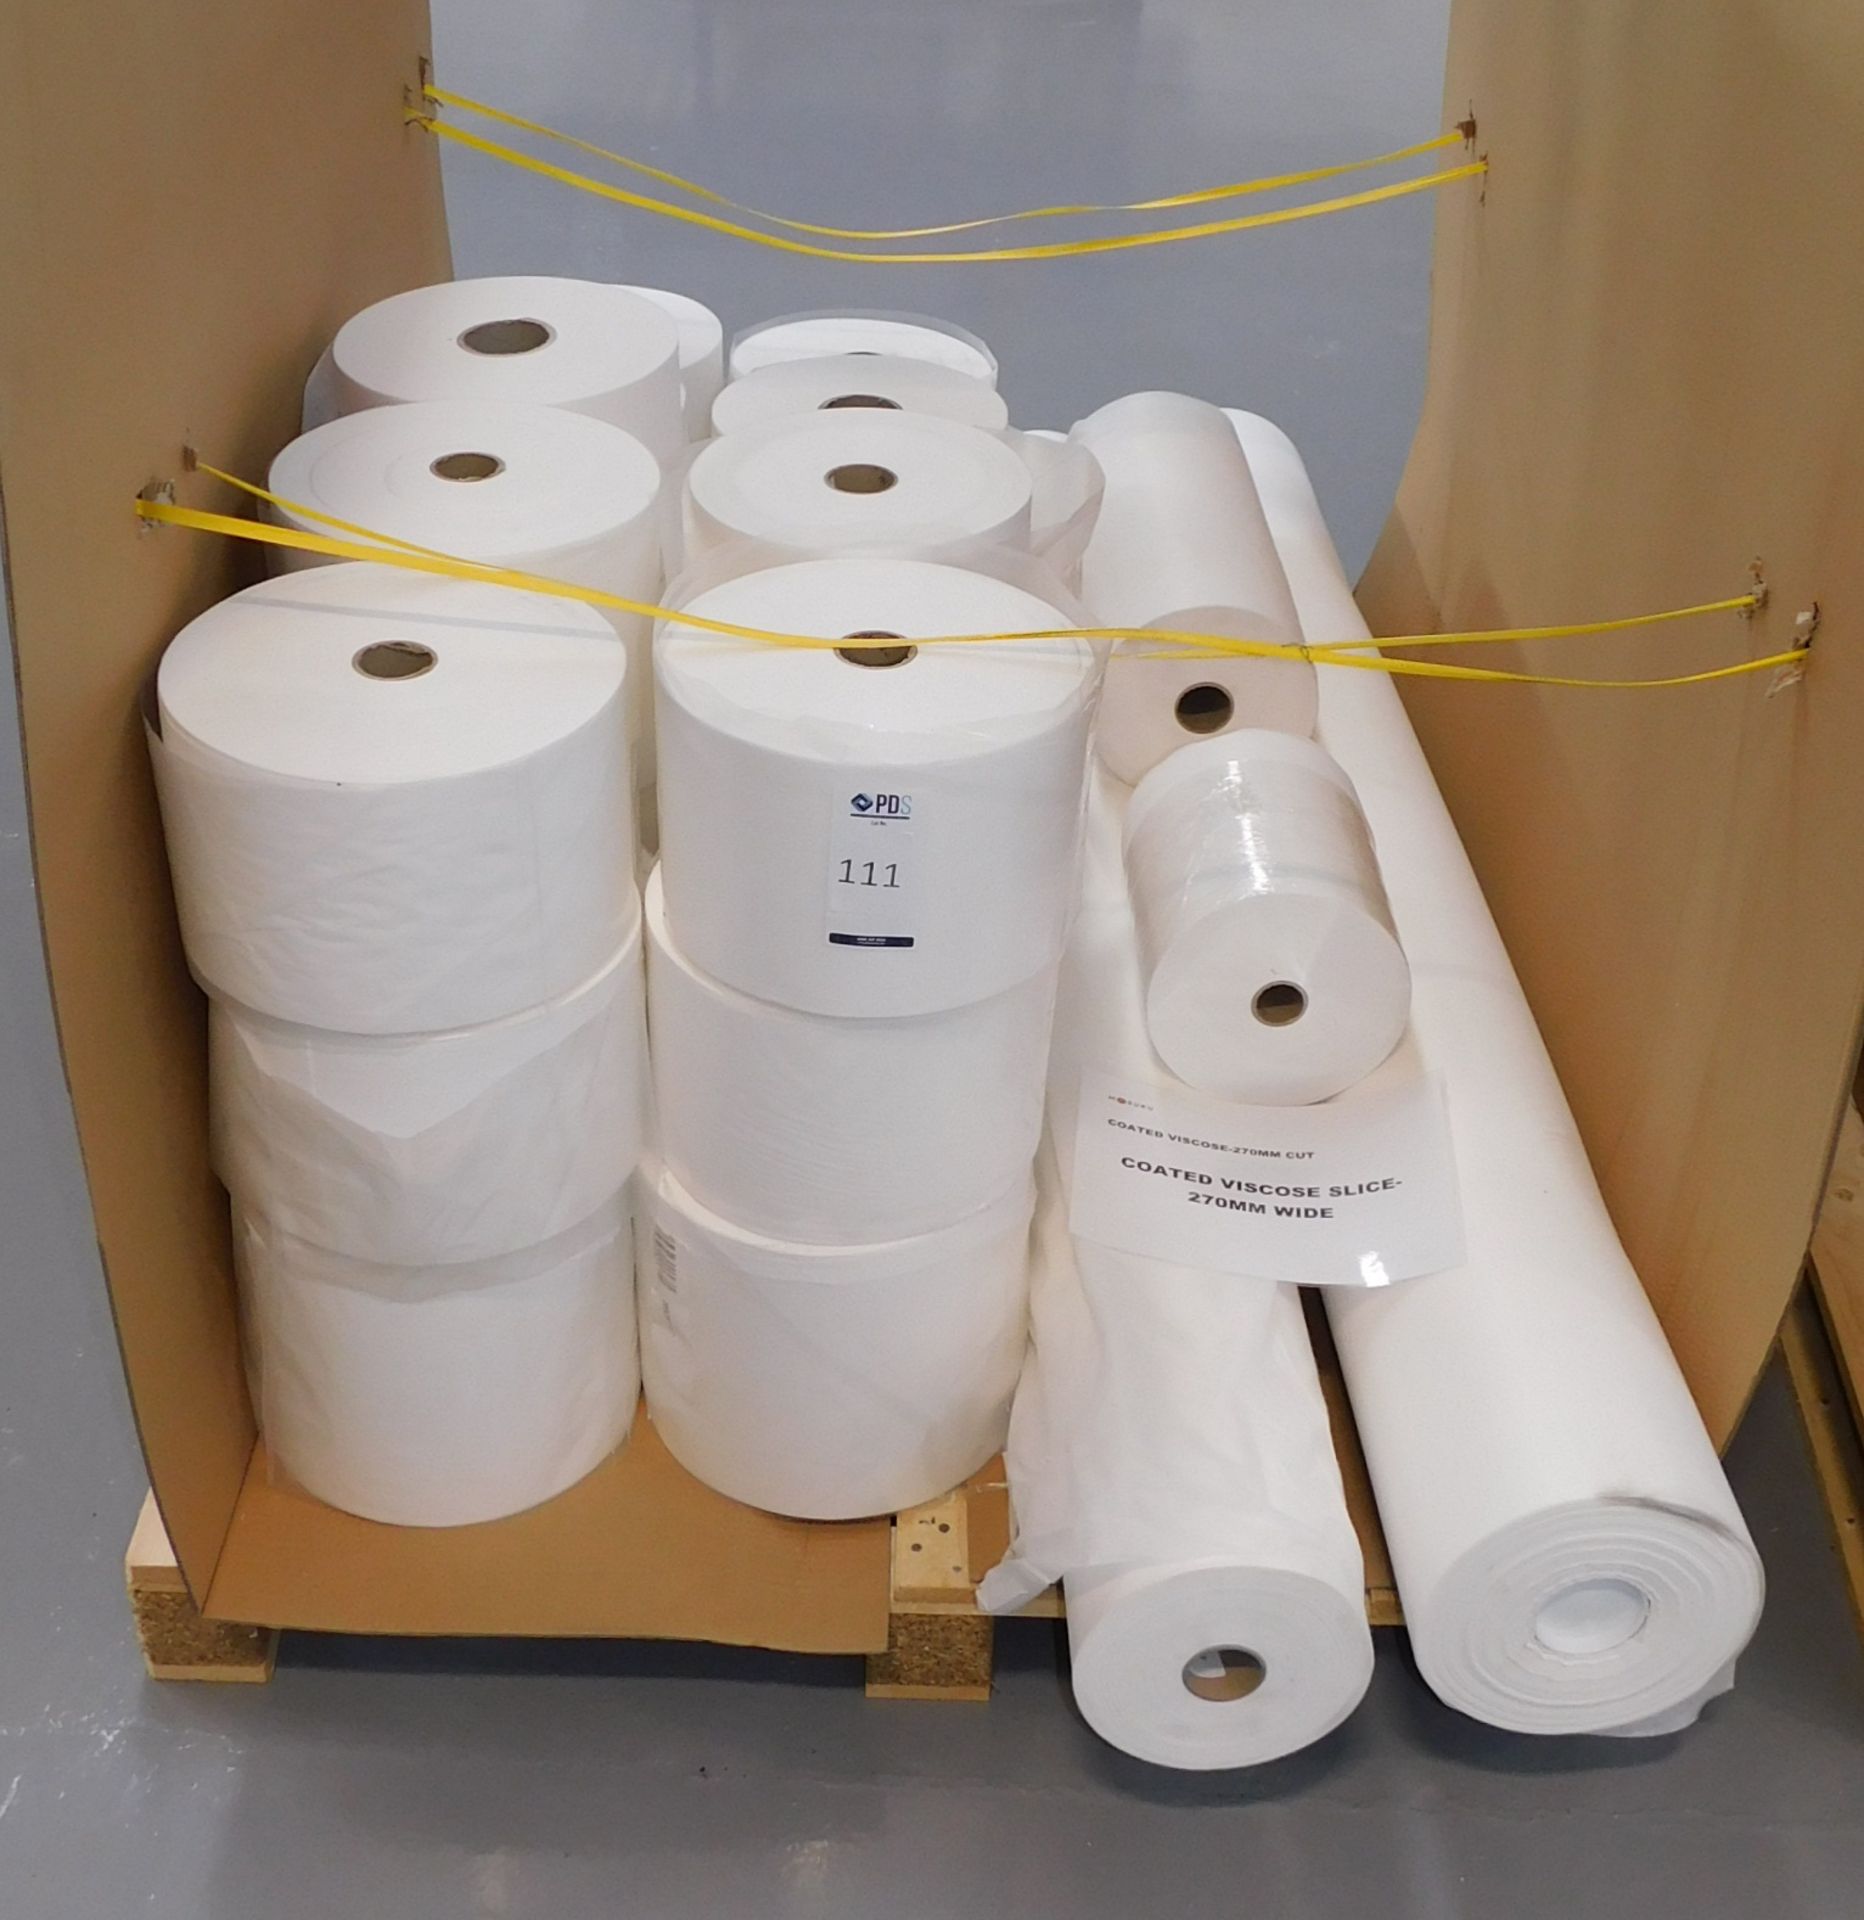 Contents of Stillage to include Viscose Fabric (Nylon Nanodot) Rolls, Cut to Fit Production